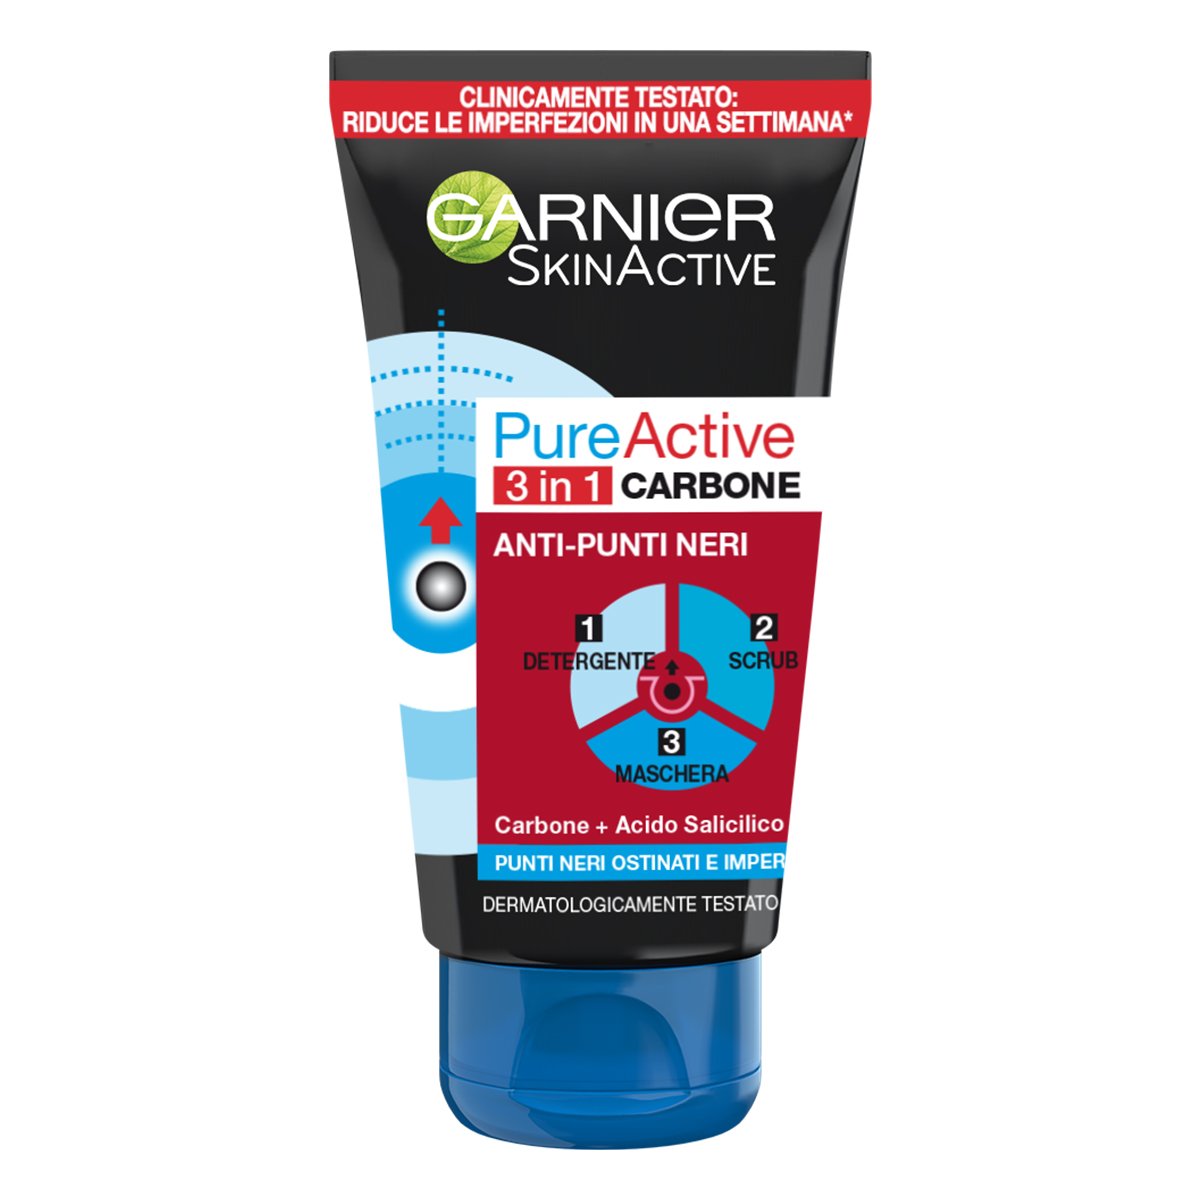 Pure Active 3 in 1 Carbone 1